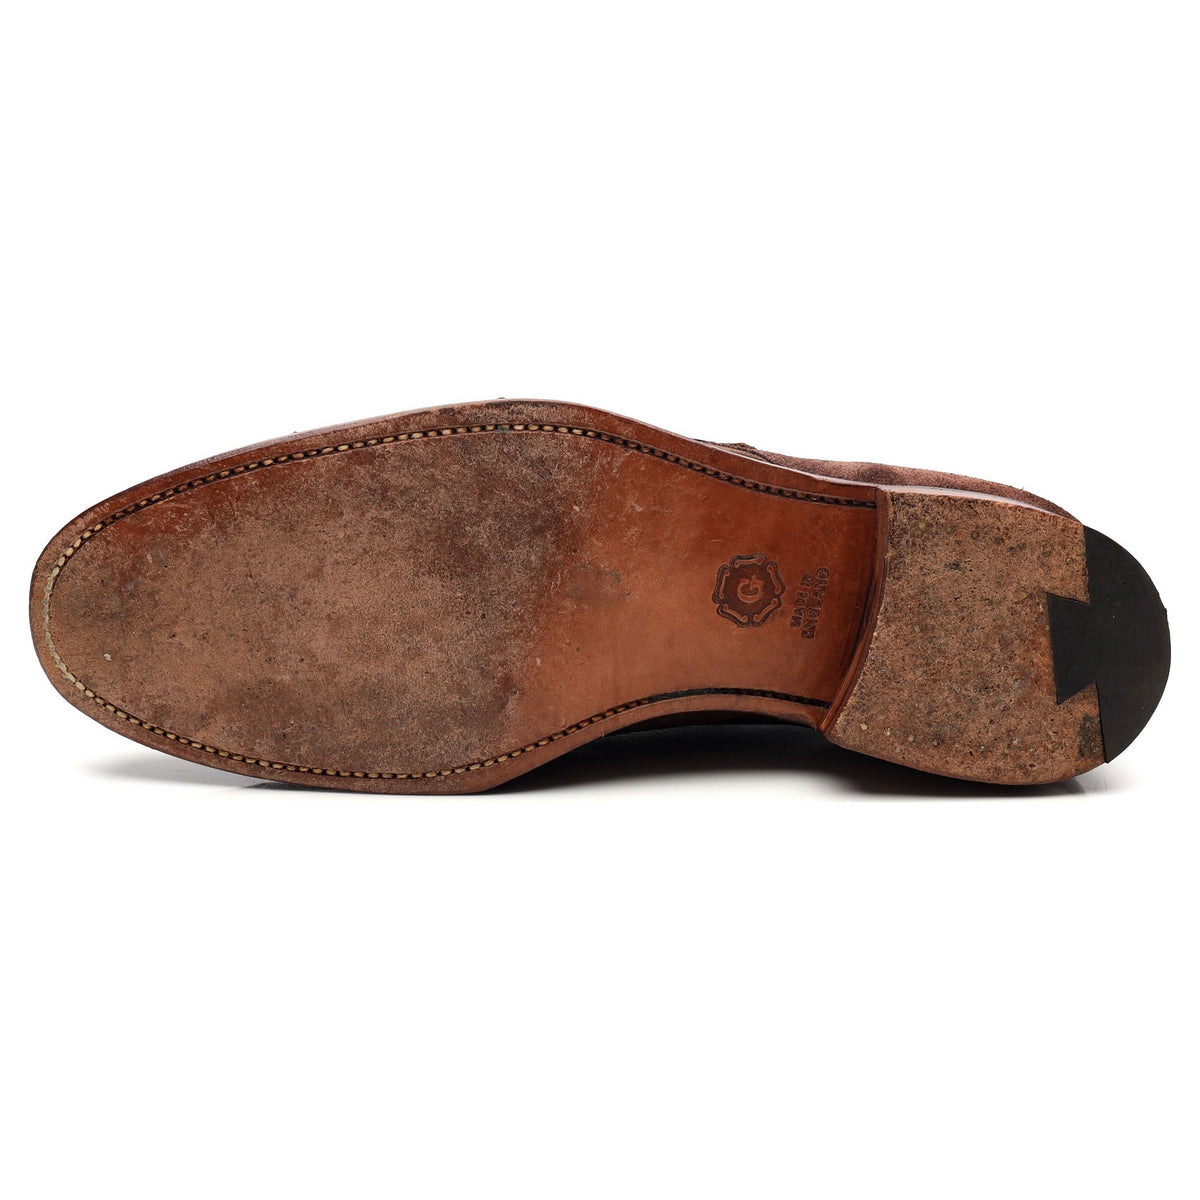 G:One Brown Suede Double Monk Strap UK 7 F